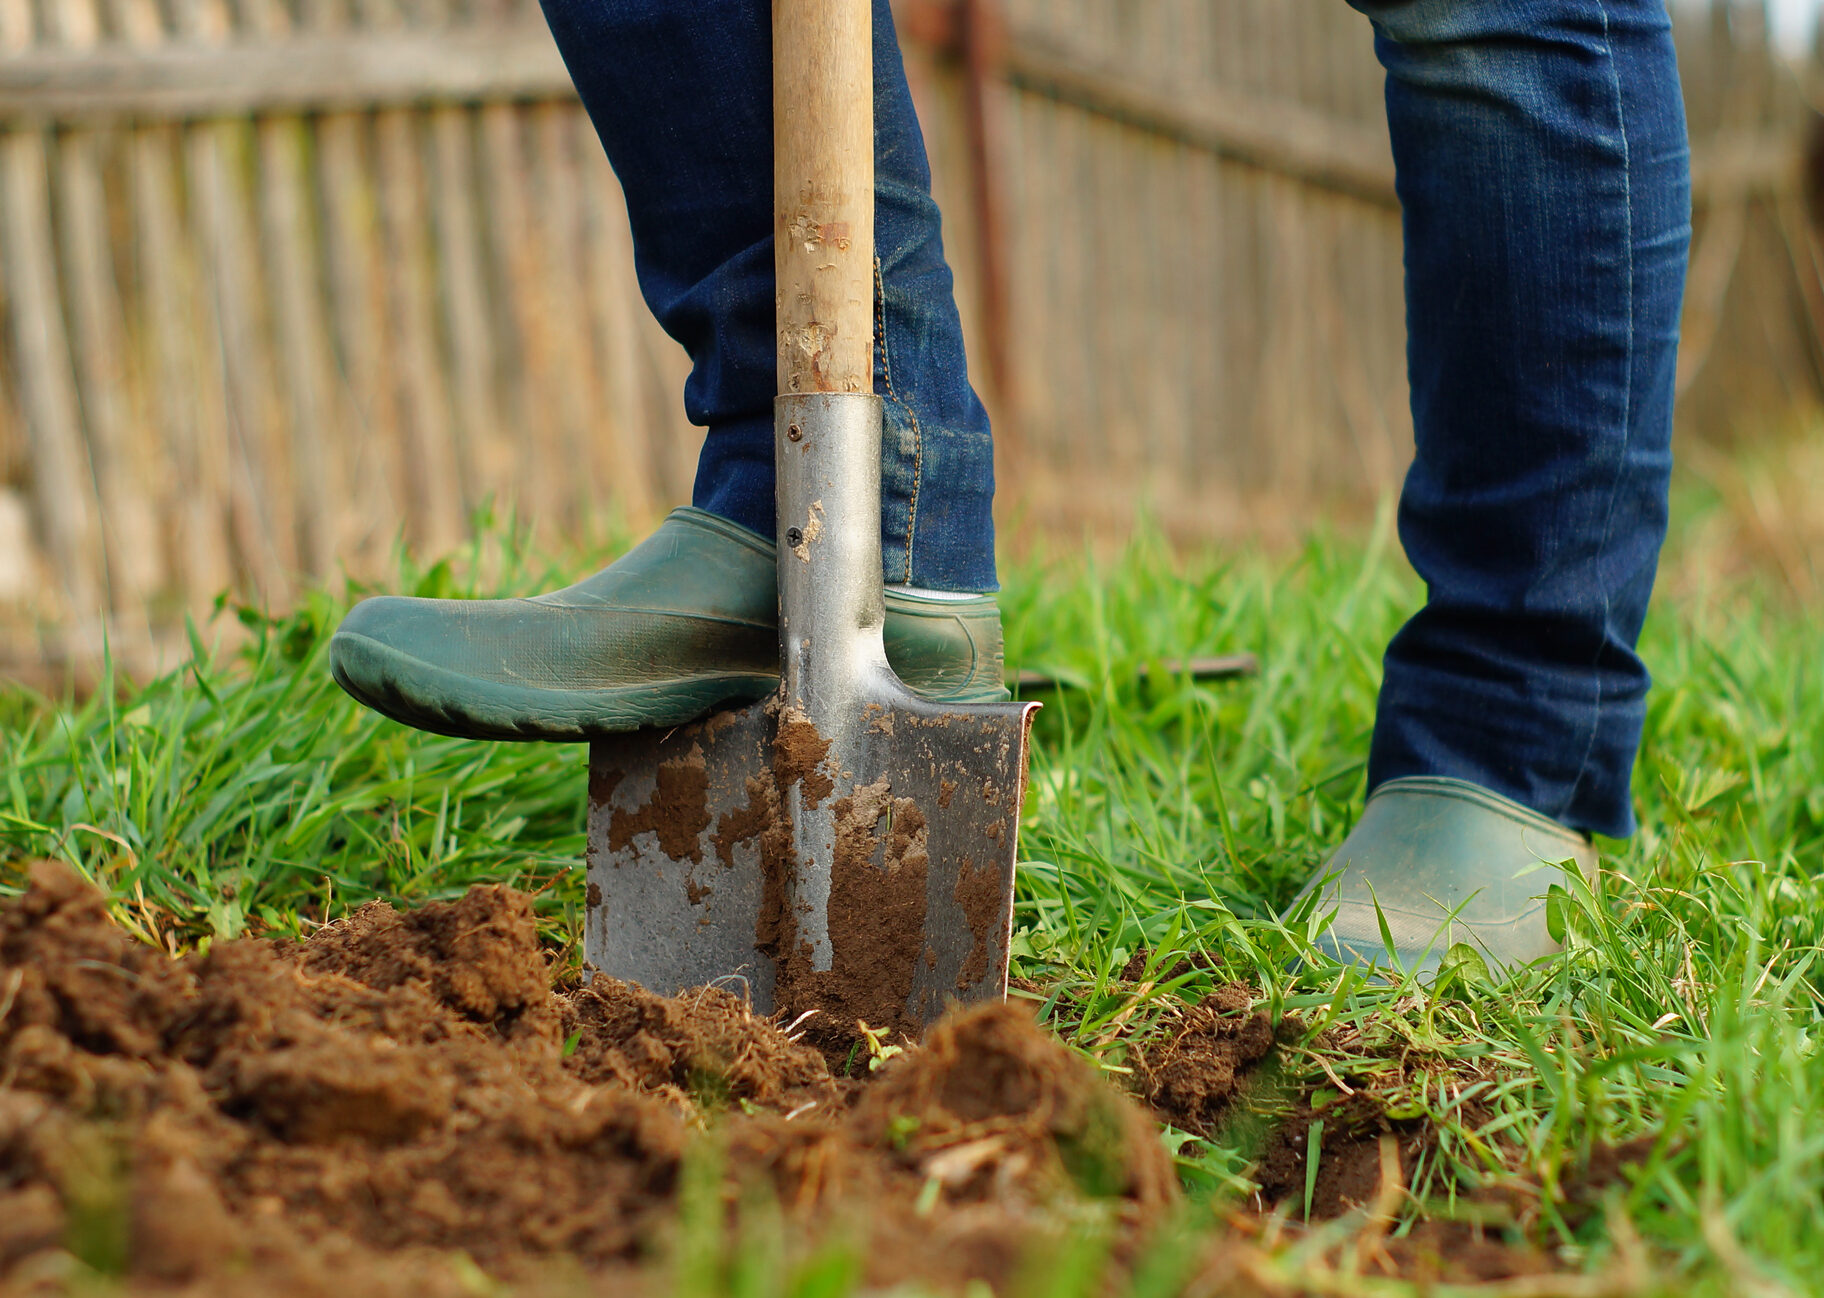 A home gardener digging into their lawn's soil with a shovel.